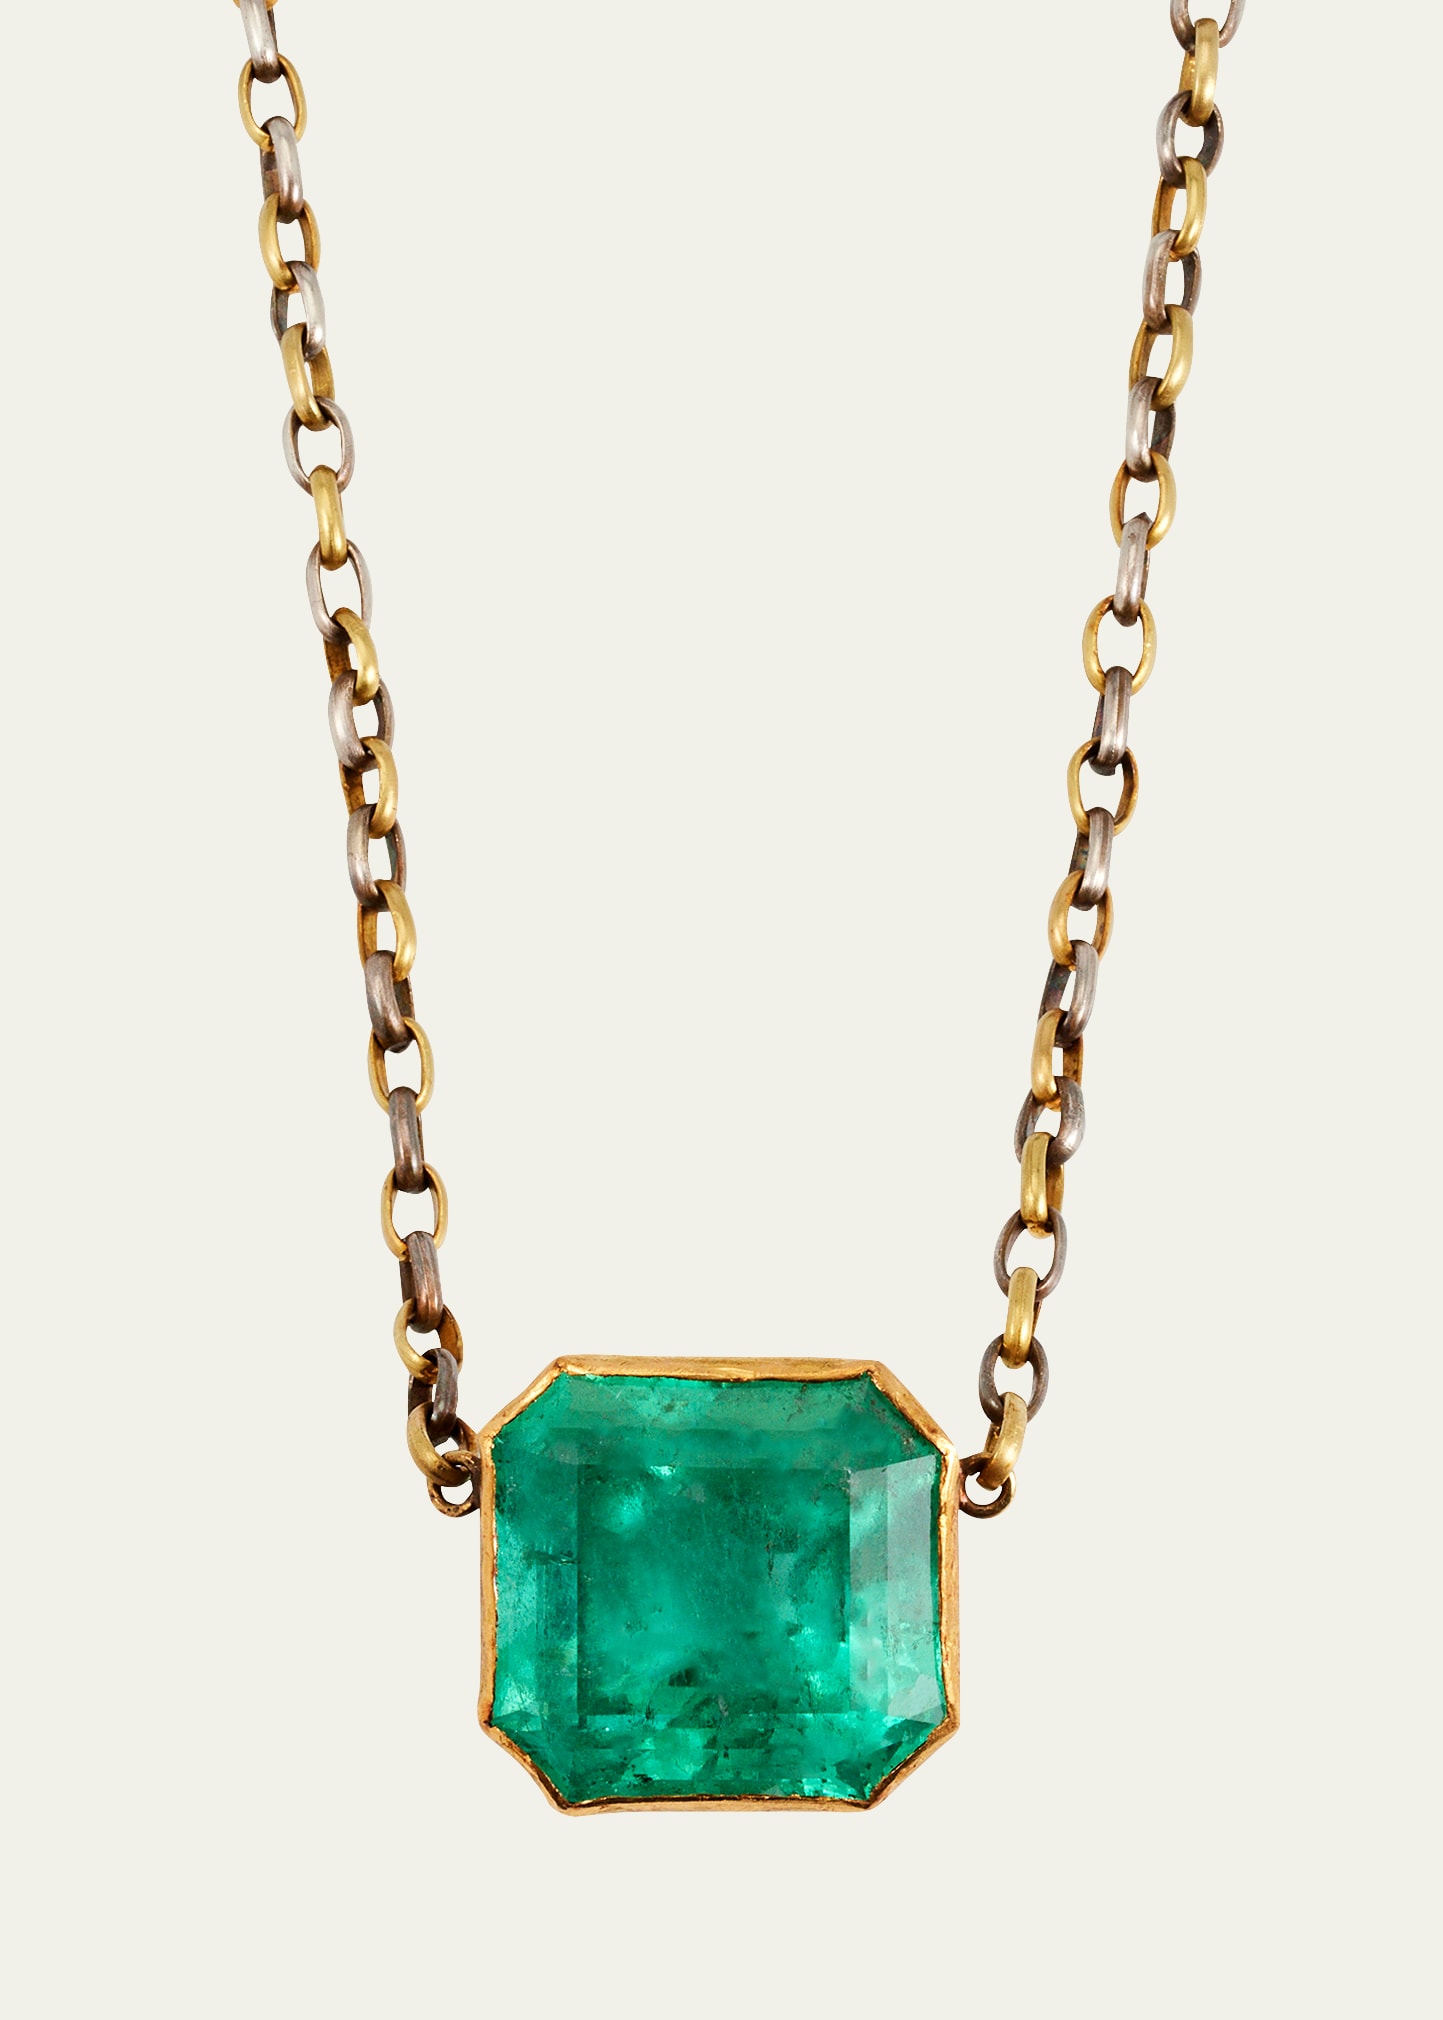 18K Yellow Gold Plated Earth Echo Necklace with Colombian Emerald Pendant and Clasp, 16.75"L